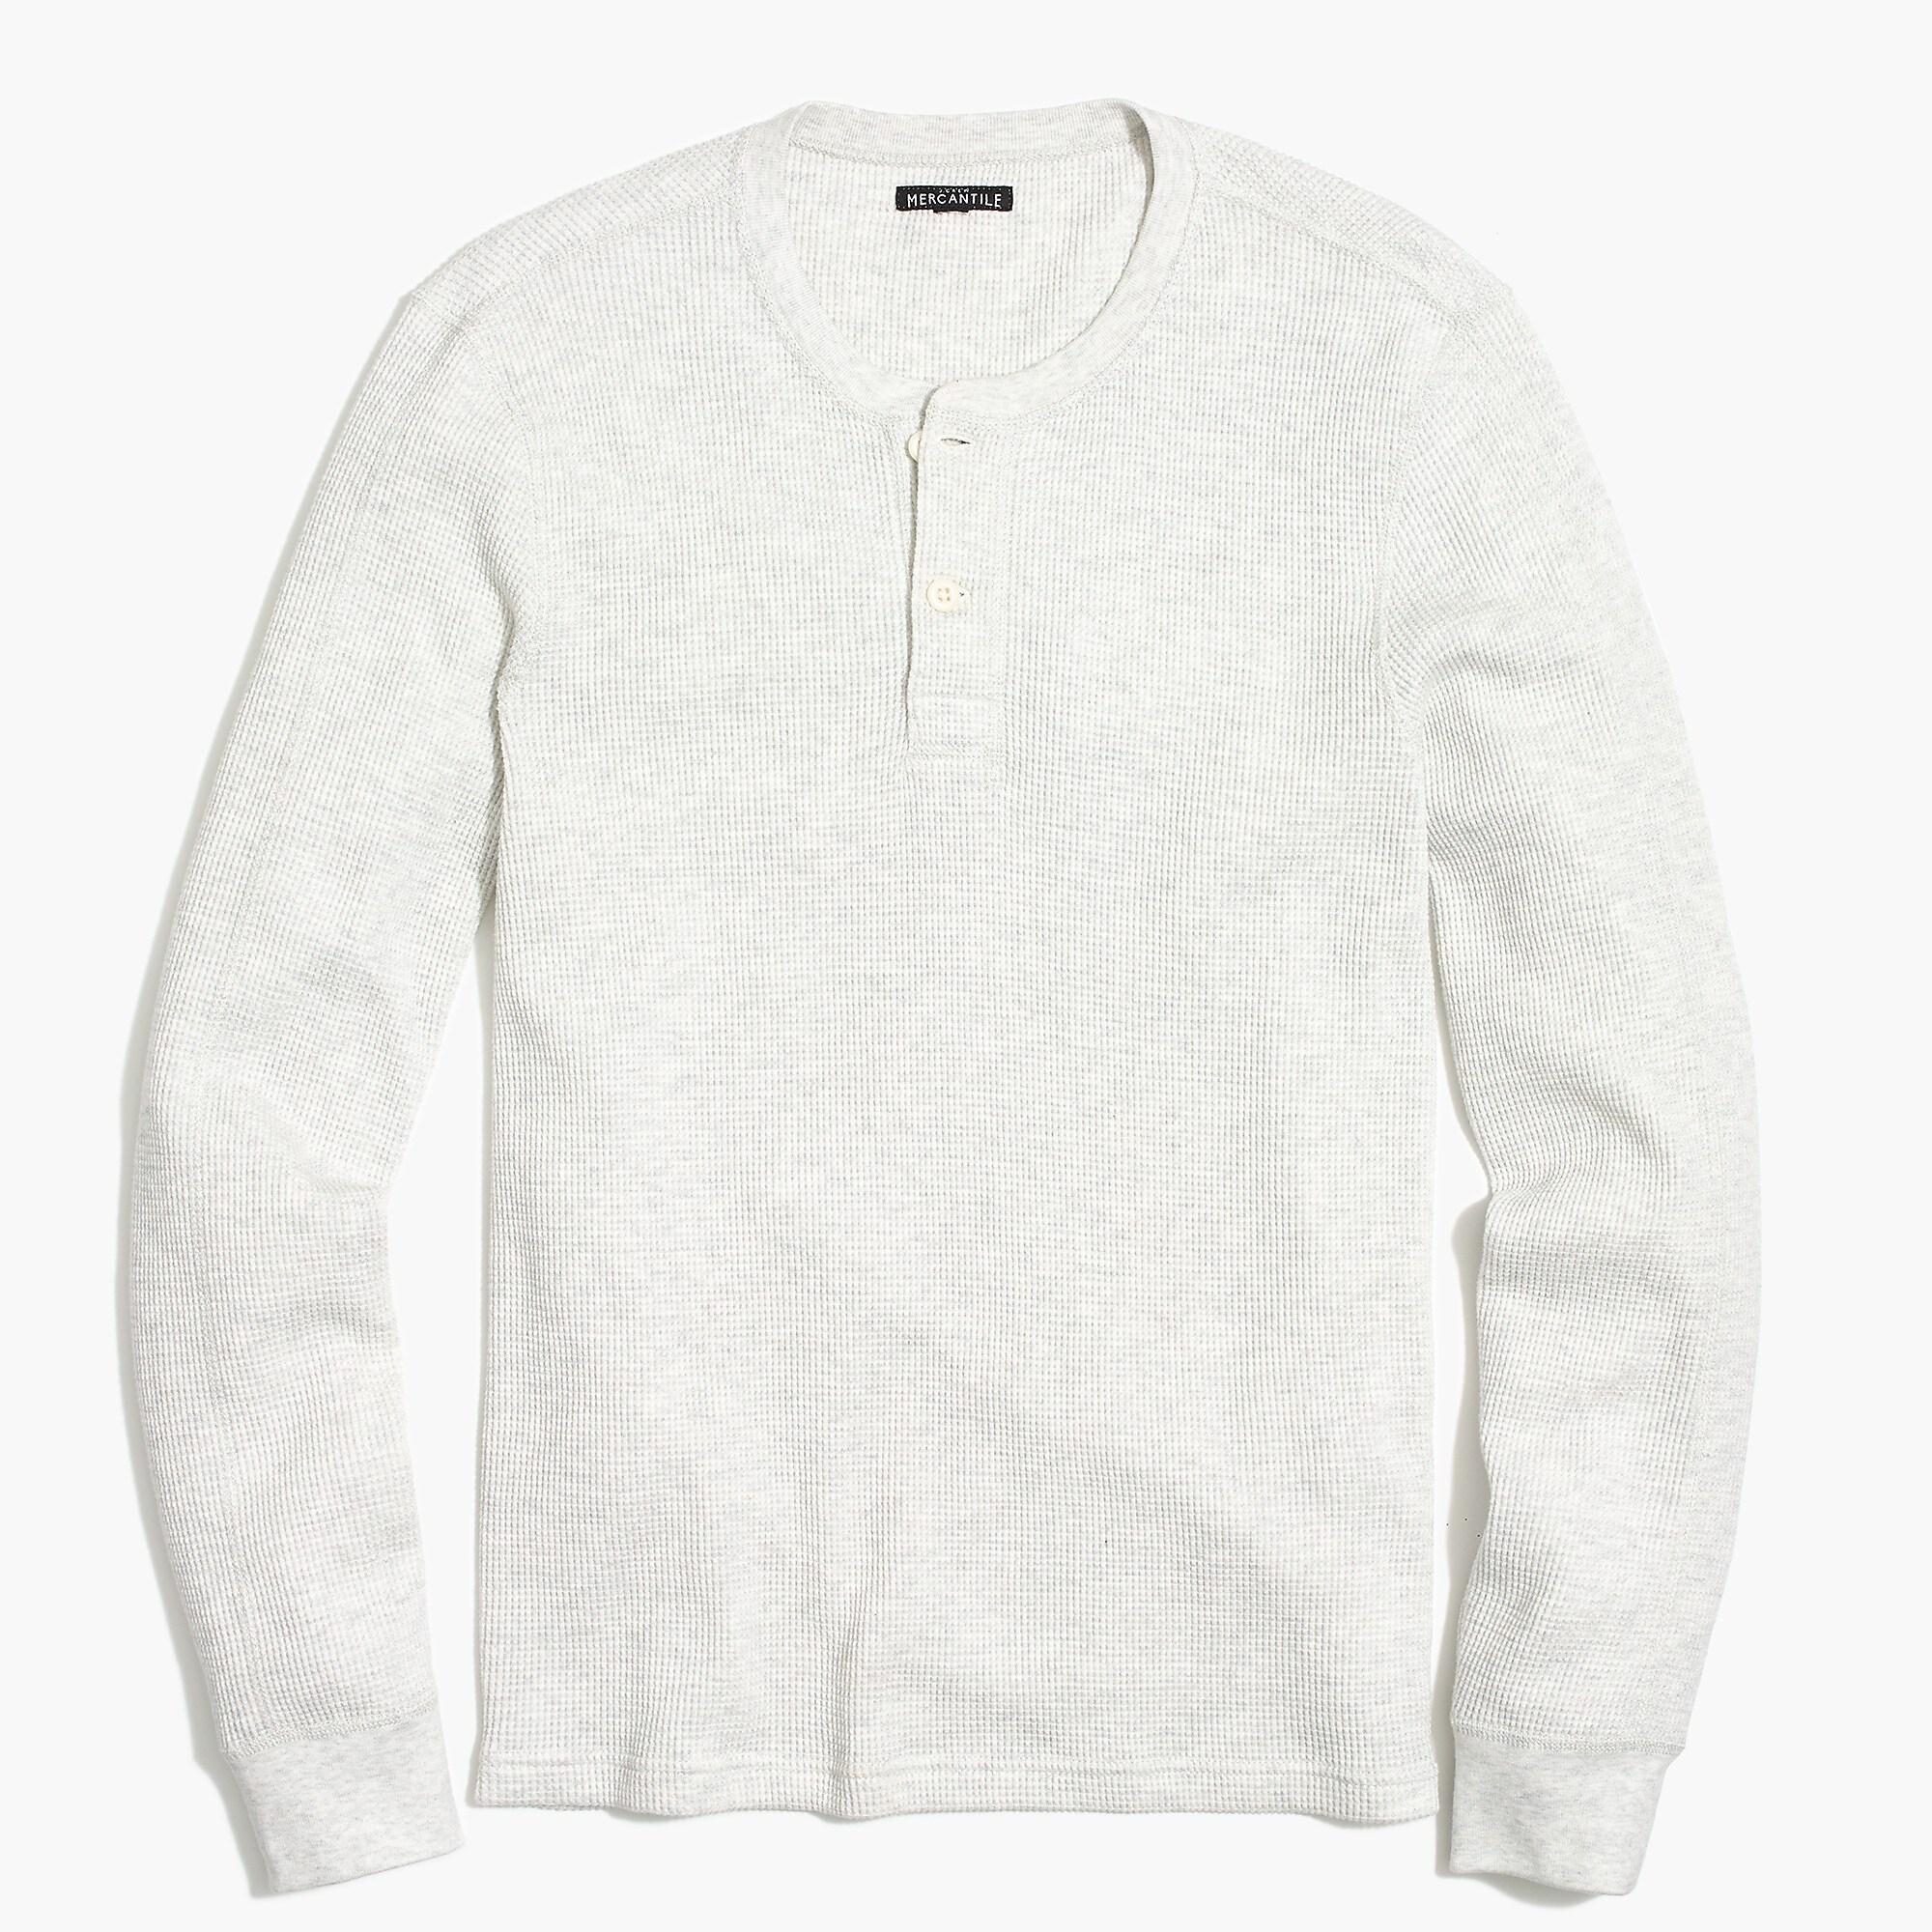 J.Crew Cotton Long-sleeve Thermal Henley in White for Men - Lyst